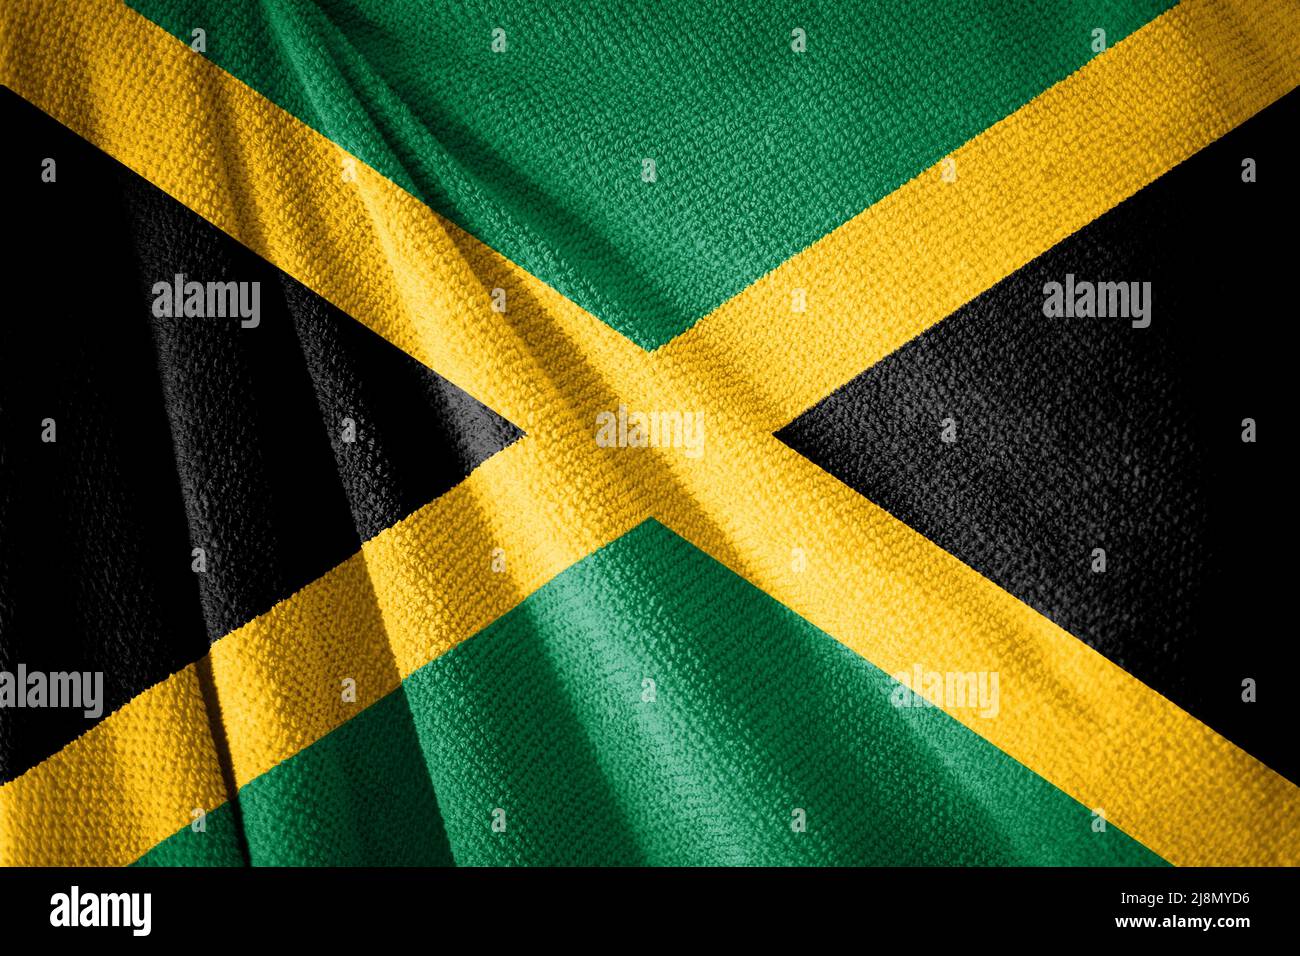 Jamaica flag on towel surface illustration with, country symbol Stock Photo